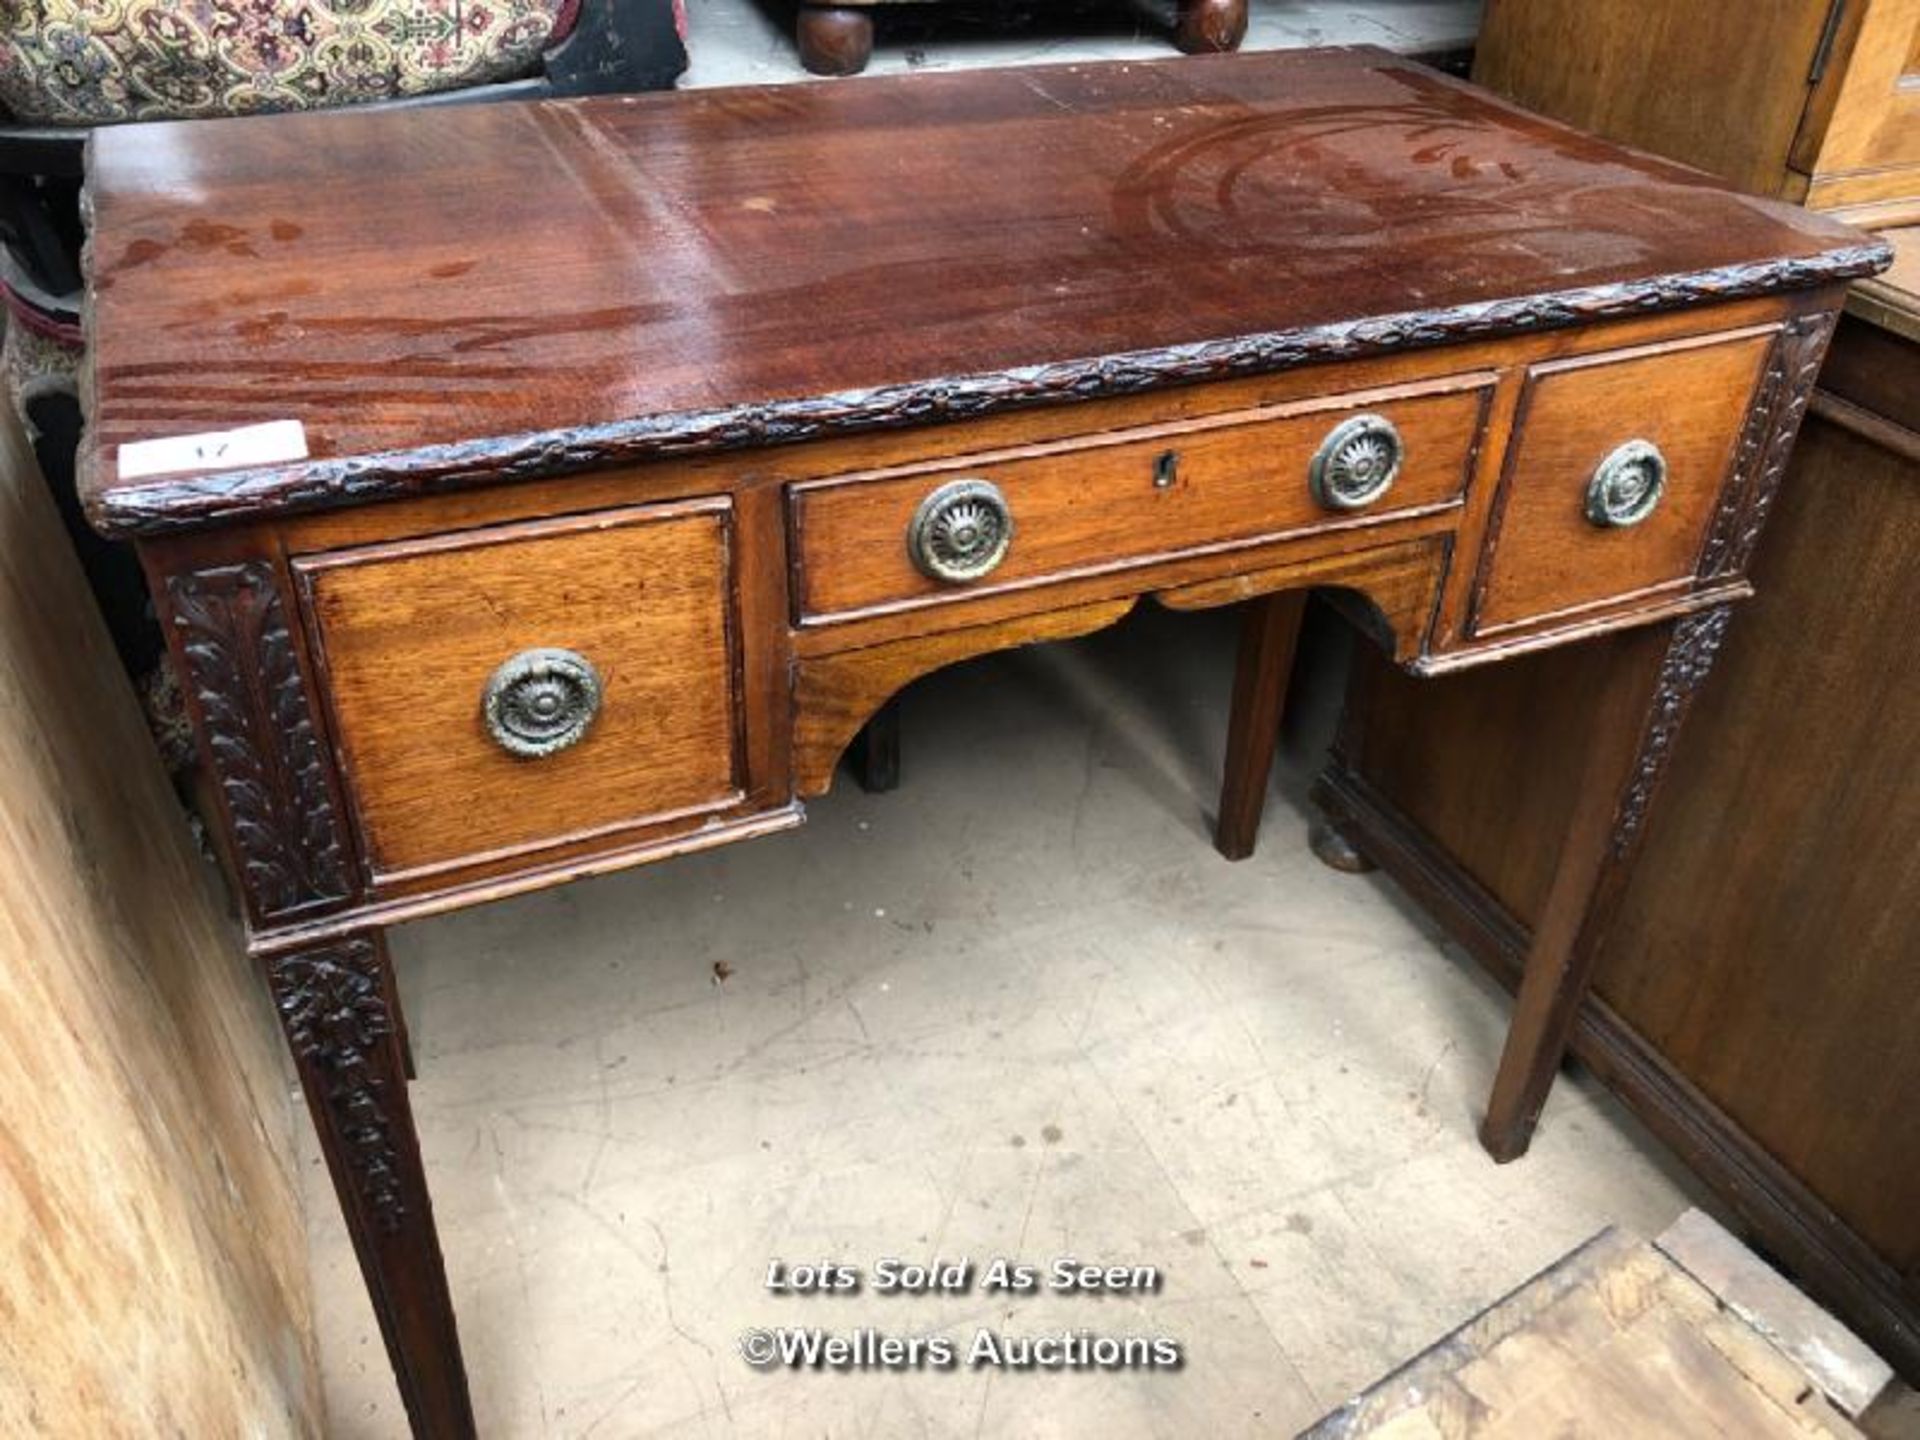 DECORATIVELY CARVED SMALL DESK WITH THREE DRAWERS, 36 X 20 X 31.5 INCHES / LOCATED AT VICTORIA